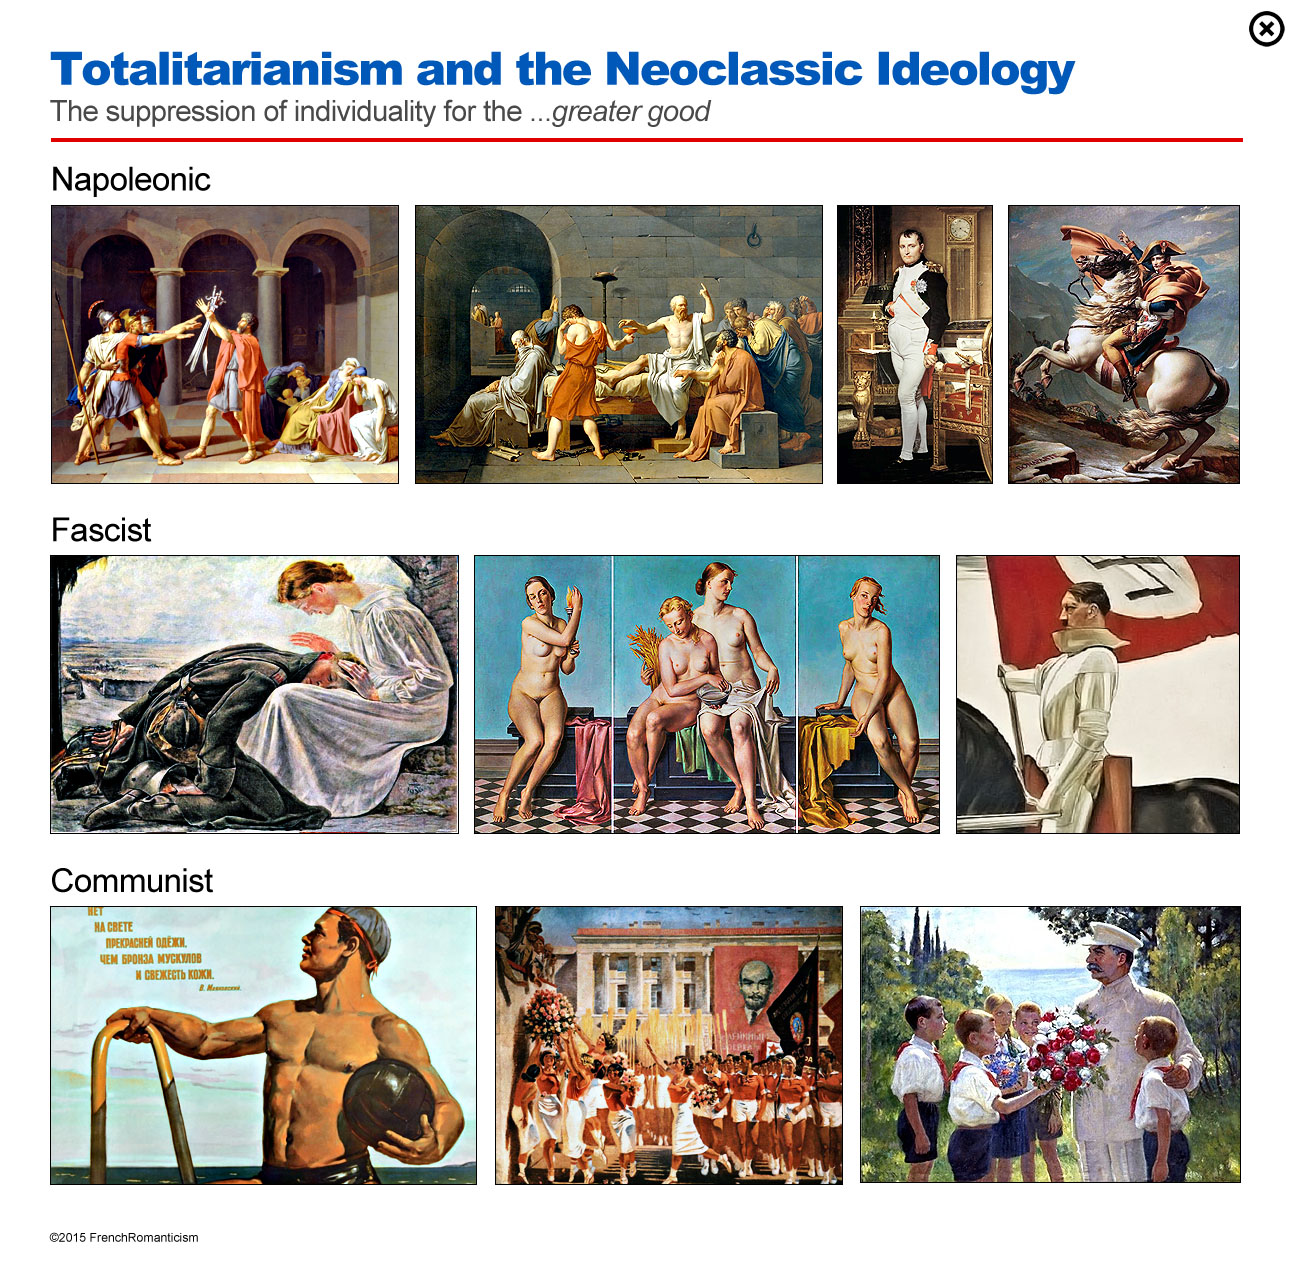 Totalitarianism and the Neoclassic Ideology